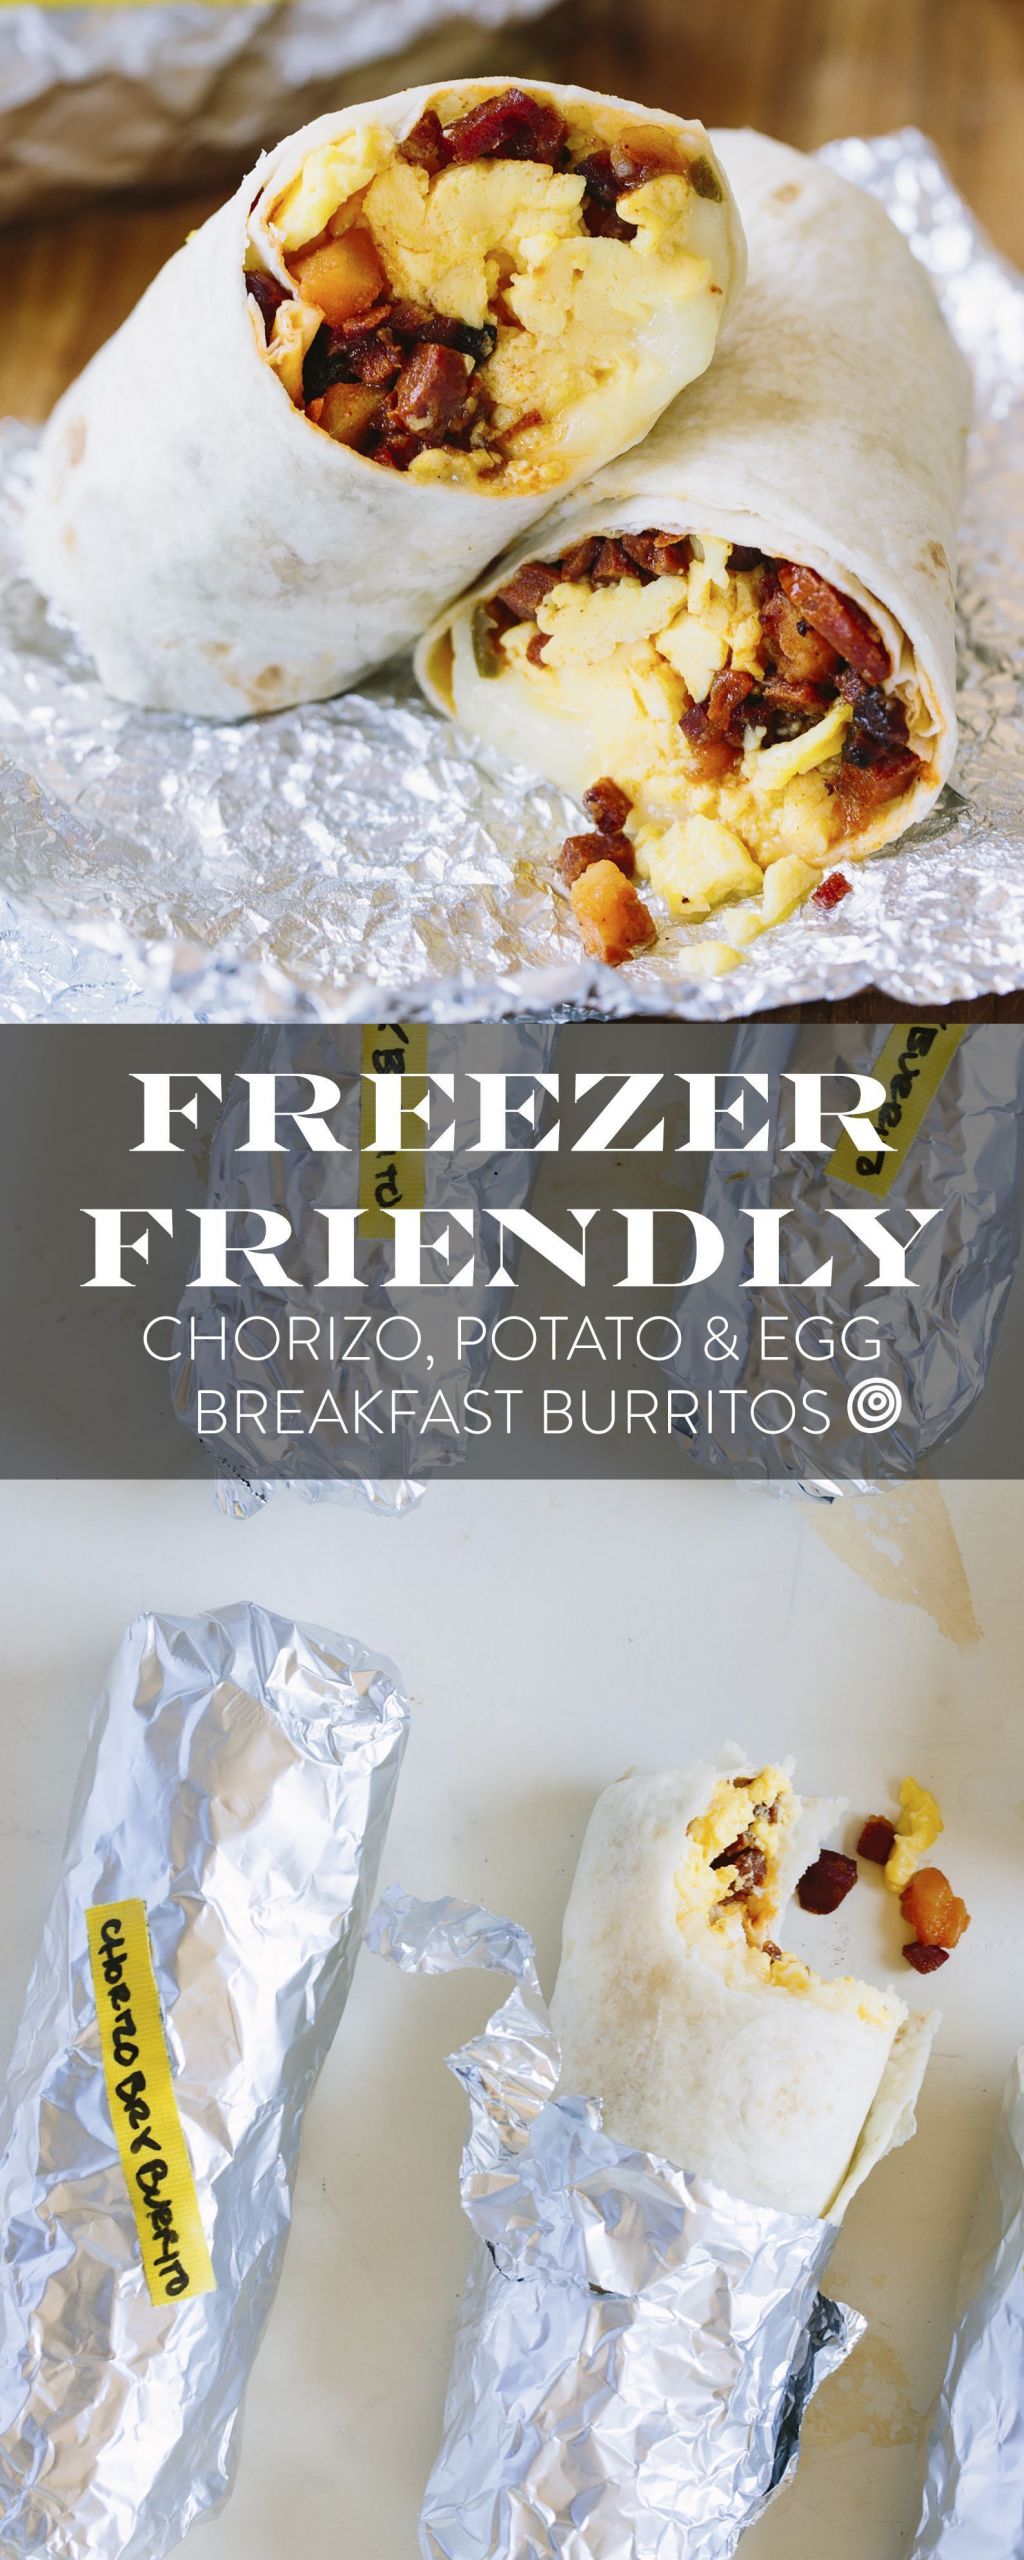 Make Ahead Breakfast Burritos For A Crowd
 How To Make Freezer Friendly Breakfast Burritos